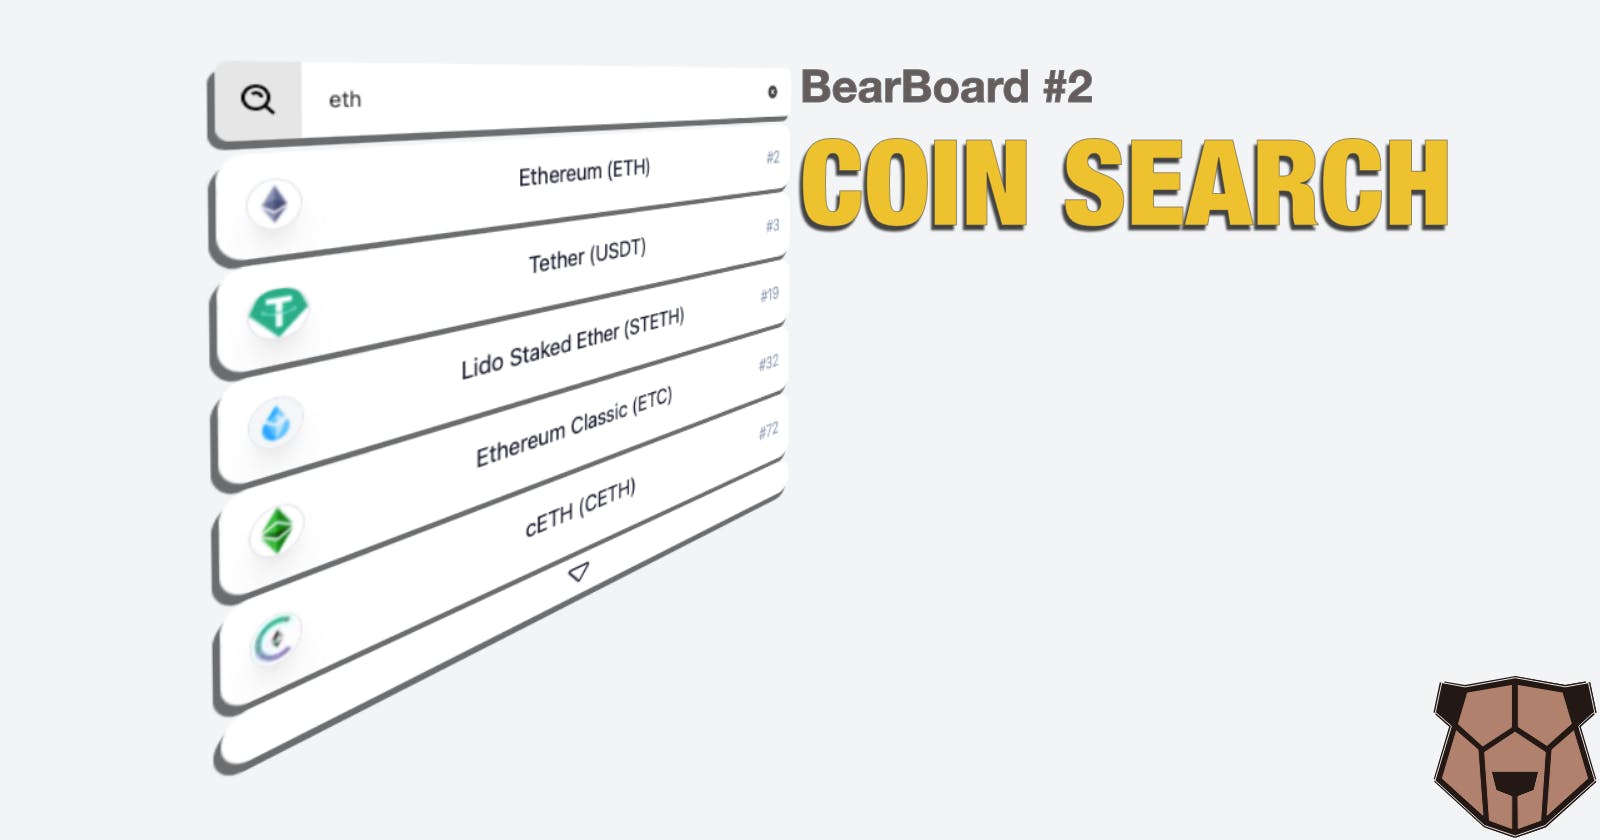 BearBoard #2 - coin search